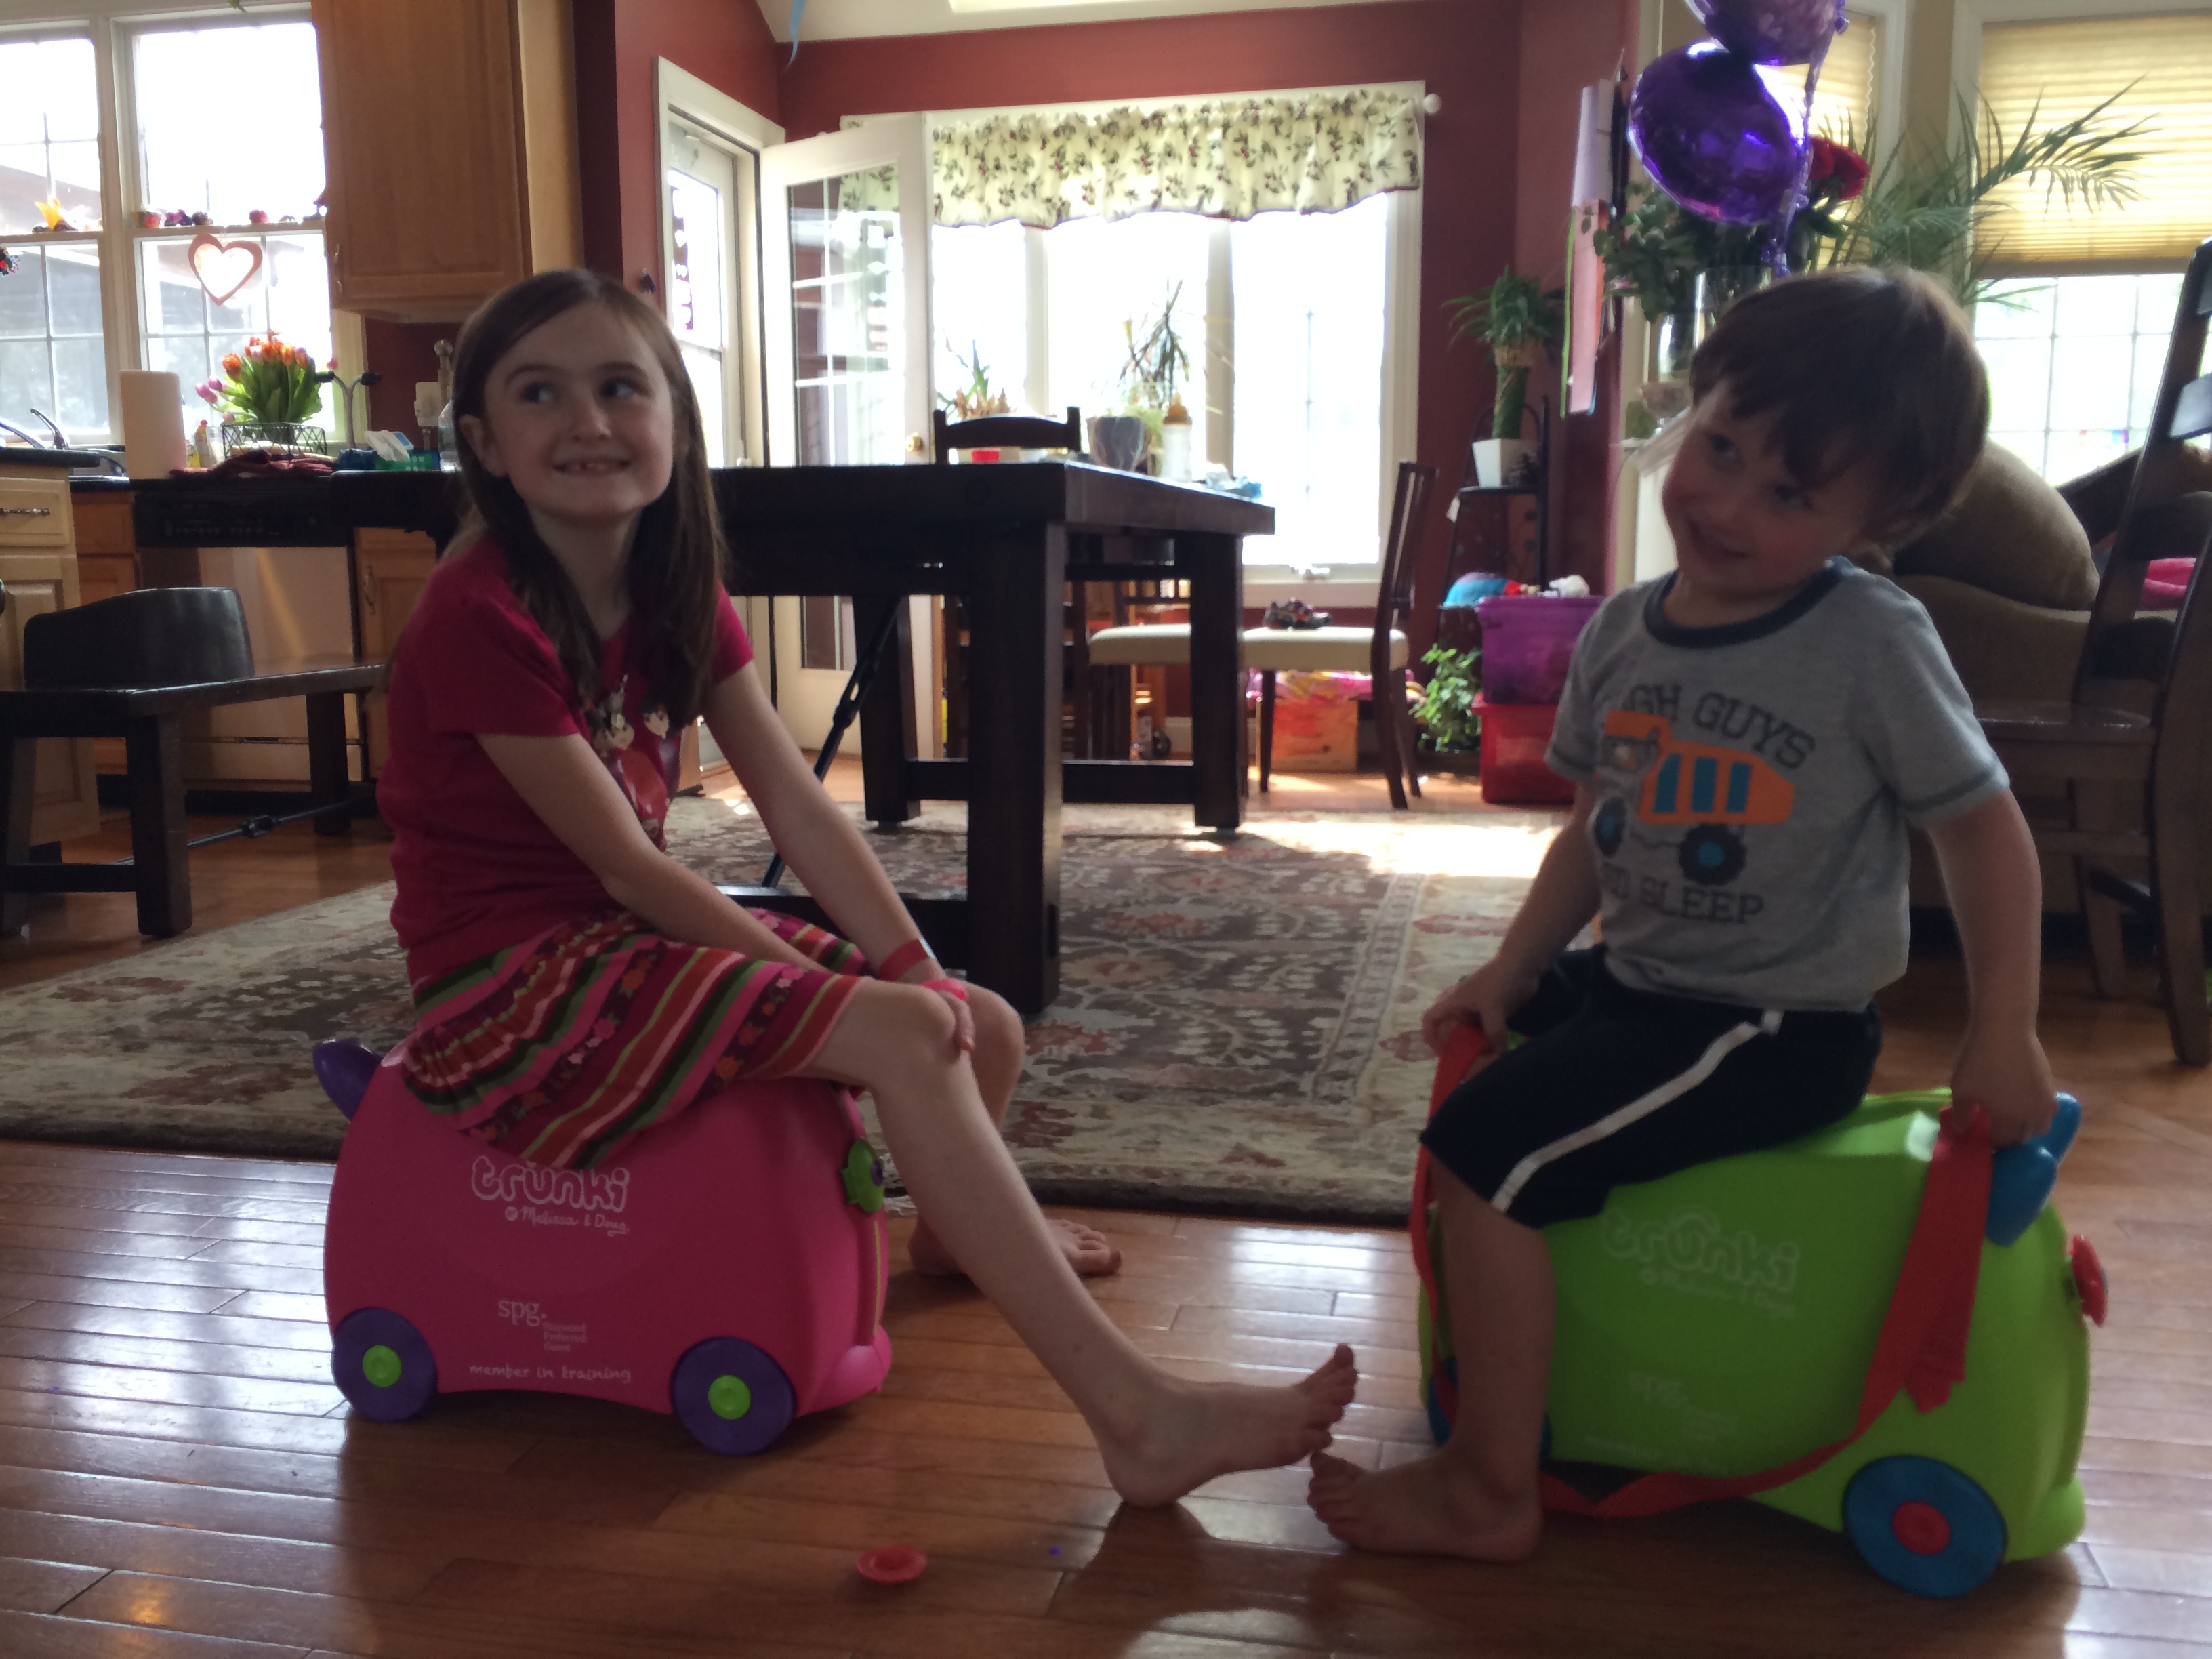 a boy and girl sitting on toy suitcases in a room